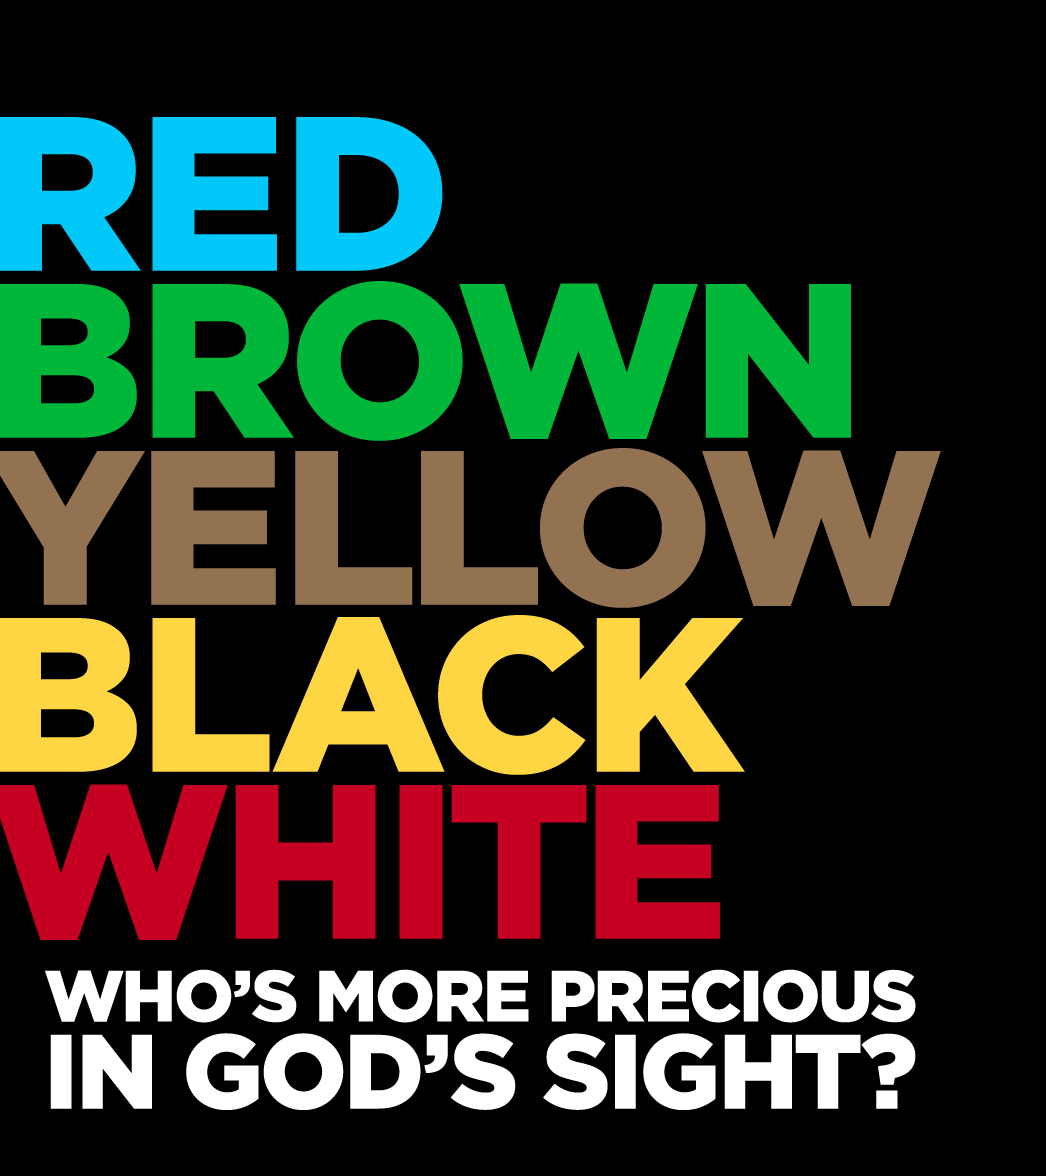 Yellow and Black Word Logo - Red Brown Yellow Black White - Who's More Precious in God's Sight ...